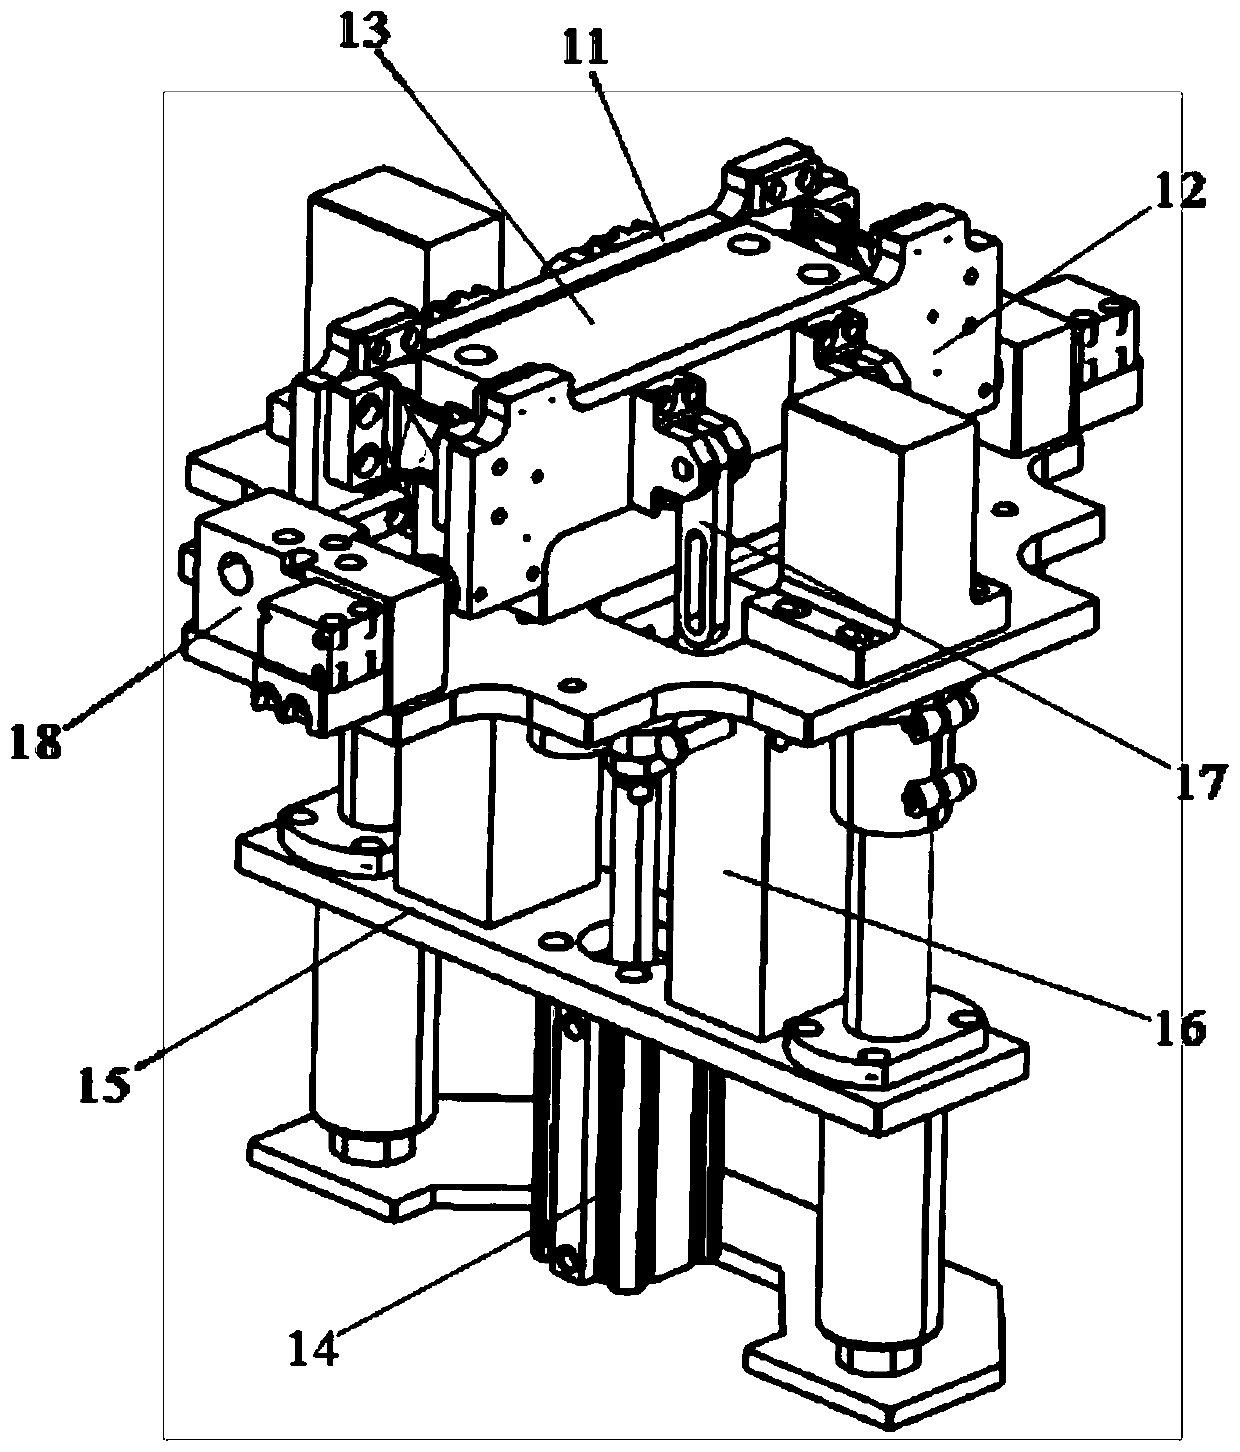 Shell product full-automatic pressing connecting and assembling mechanism